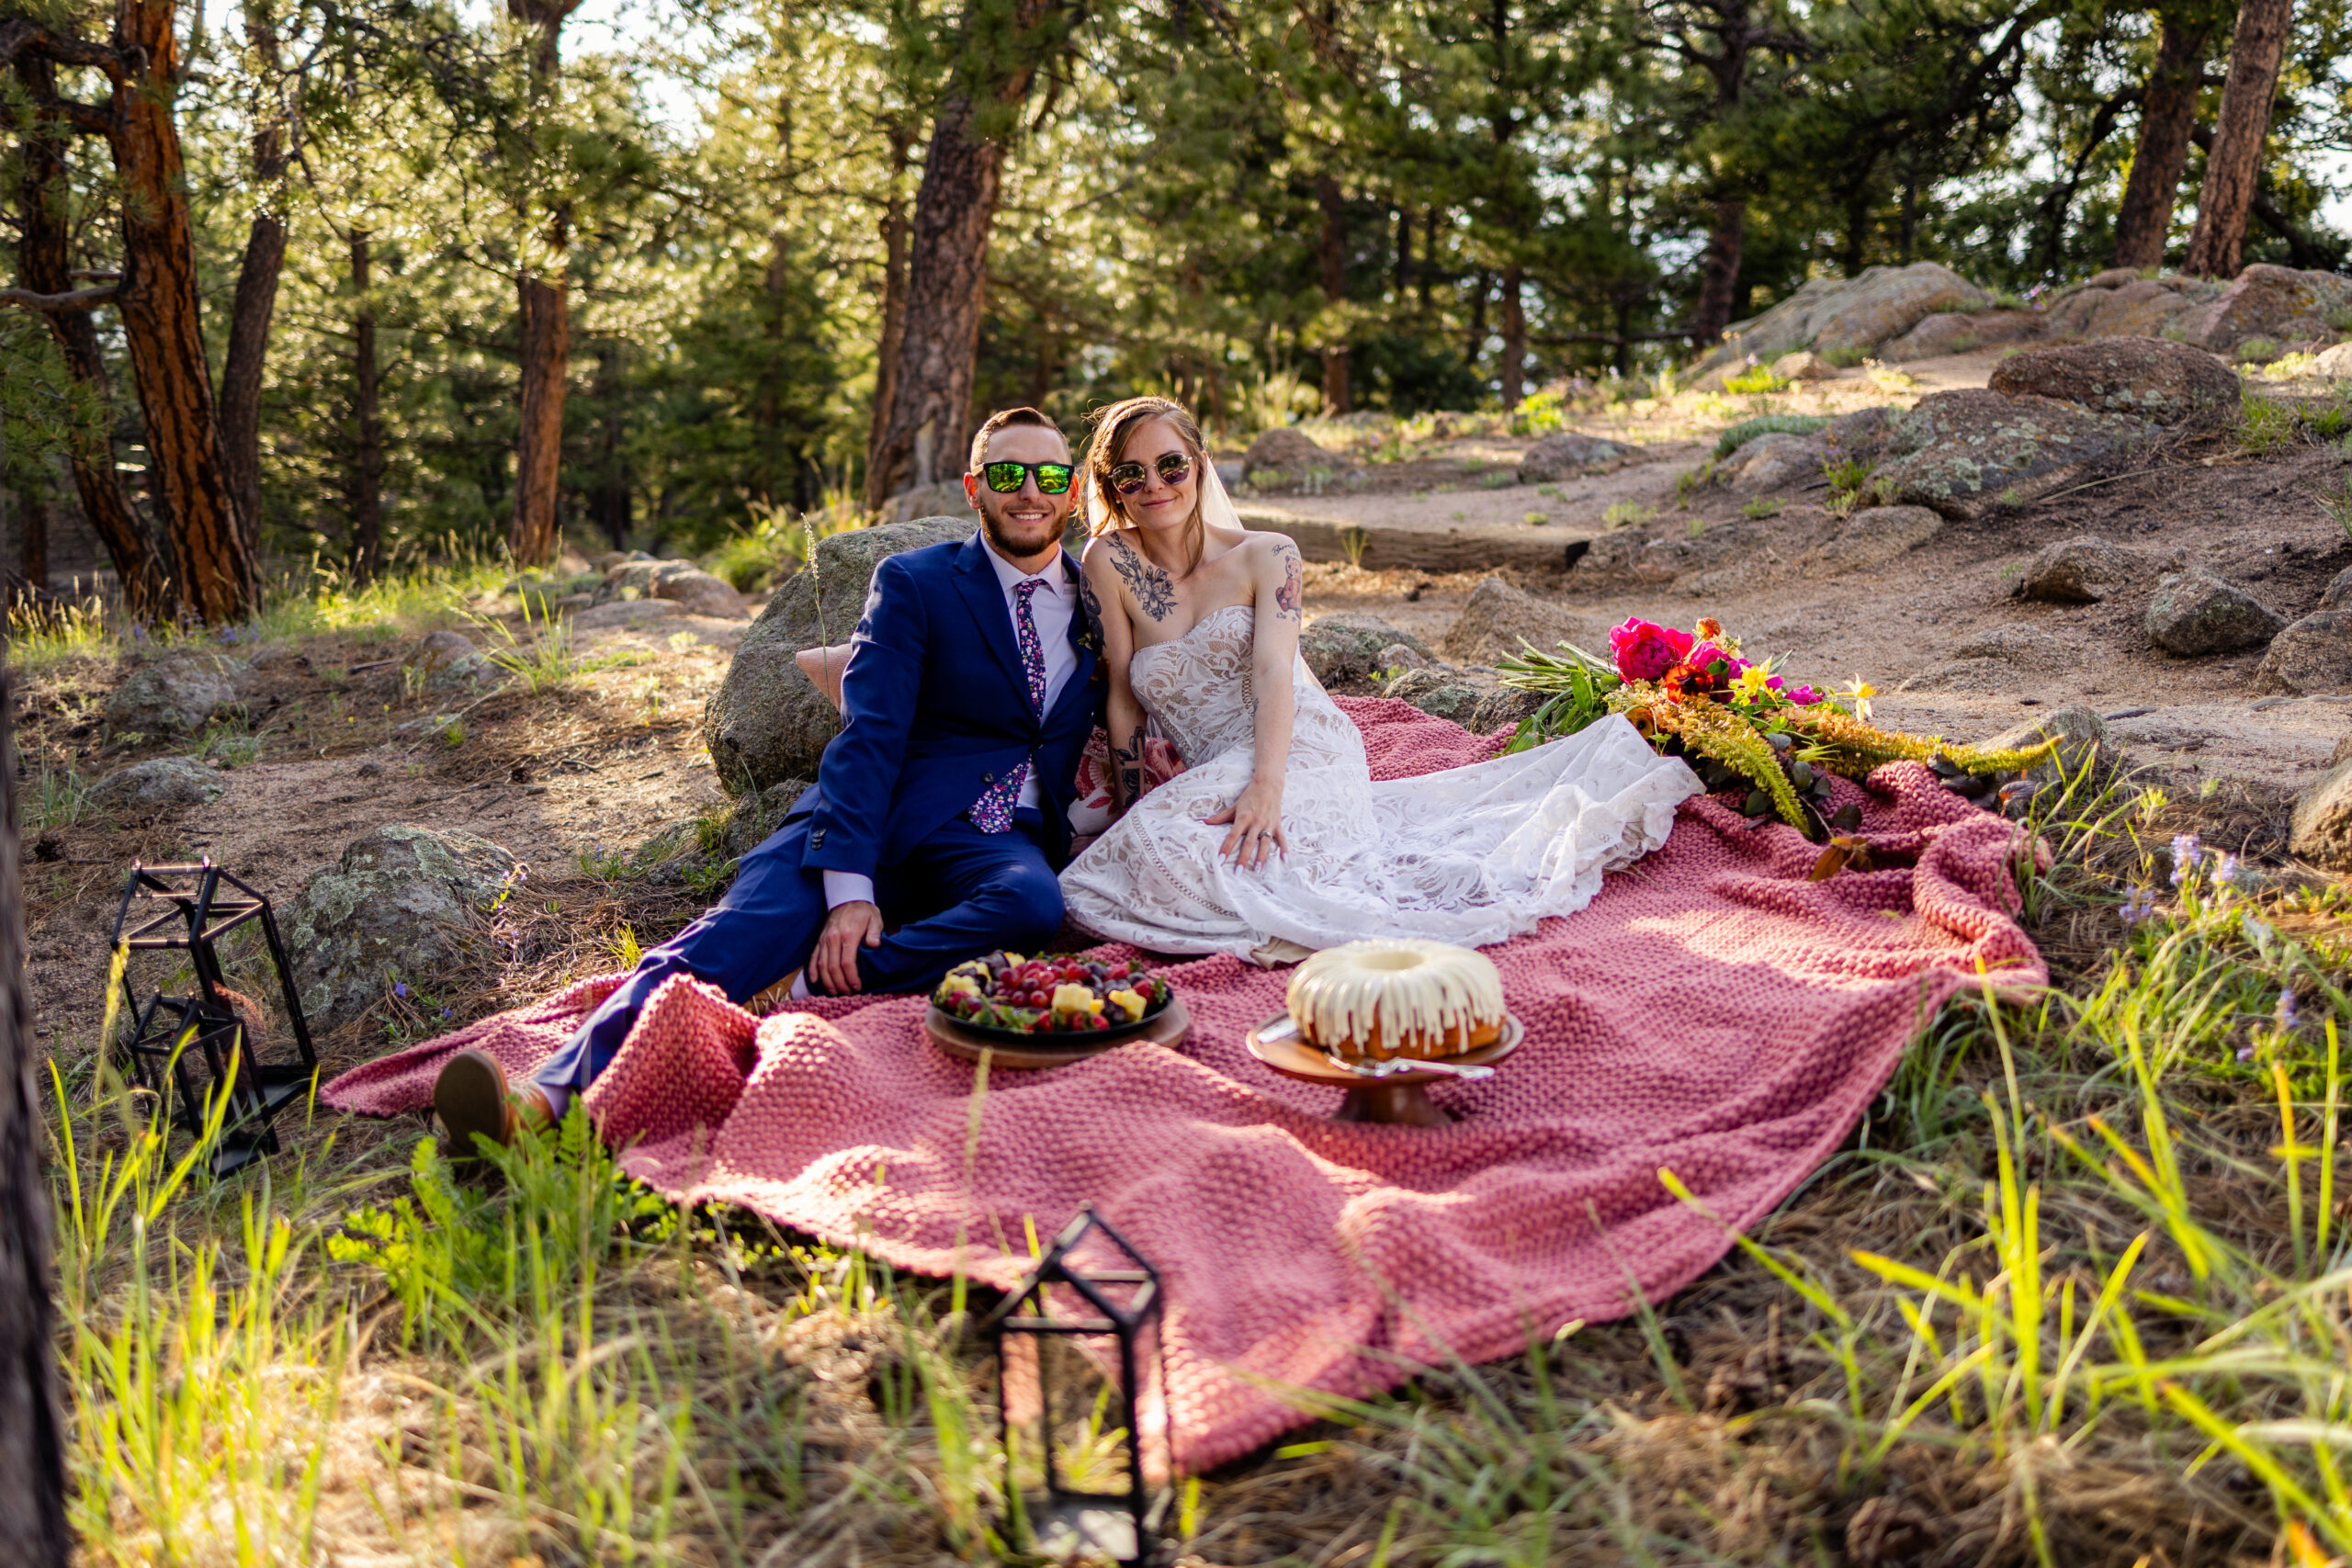 The bride and groom during their post-elopement picnic at Artist Point after their Sunrise Amphitheater elopement ceremony. 